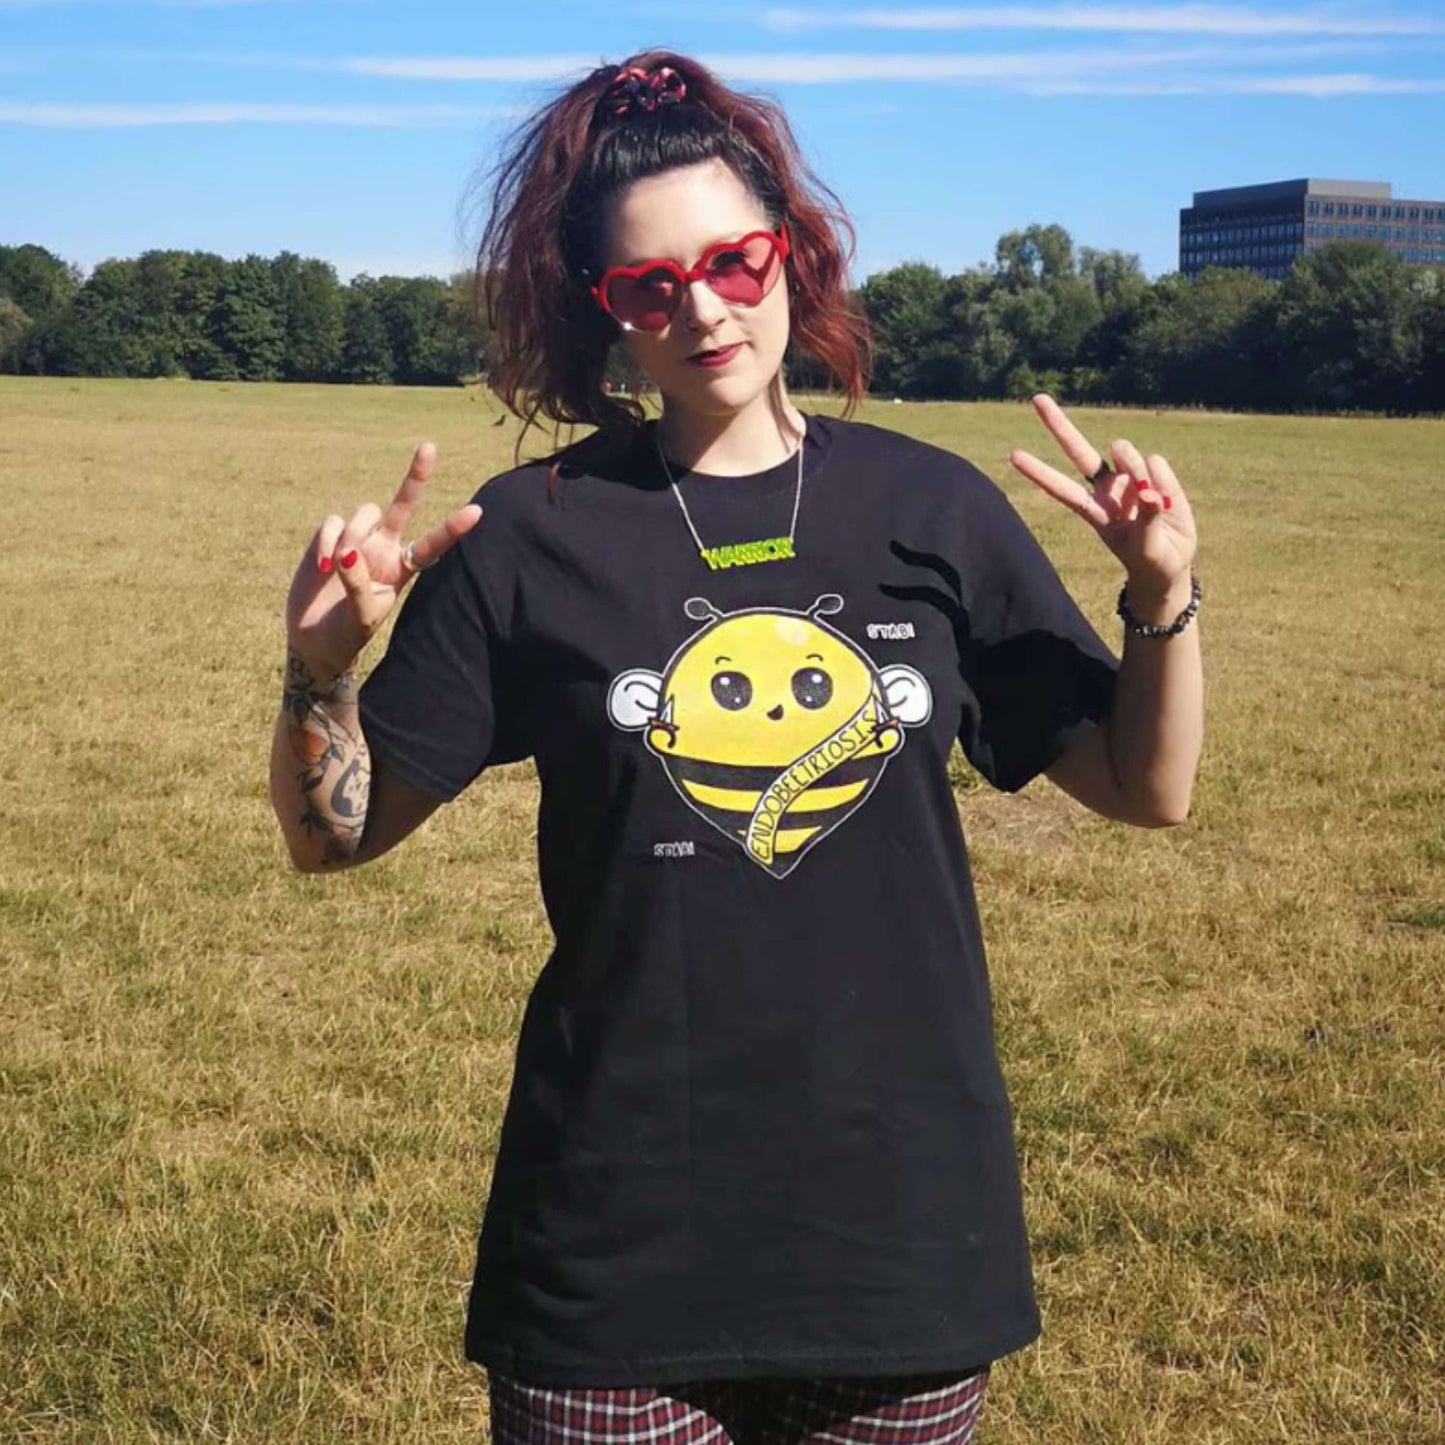 The Endobeetriosis Tee - Endometriosis being modelled by Nikky outside in a grass field wearing red heart sunglasses and red checkered trousers, she is smiling with both hands up in a peace sign. The black short sleeve tshirt features a smiling happy bumblebee holding small daggers with a yellow banner reading 'endobeetriosis' with the words 'stab! stab!' surrounding the buzzy bee. The hand drawn design is raising awareness for endometriosis.